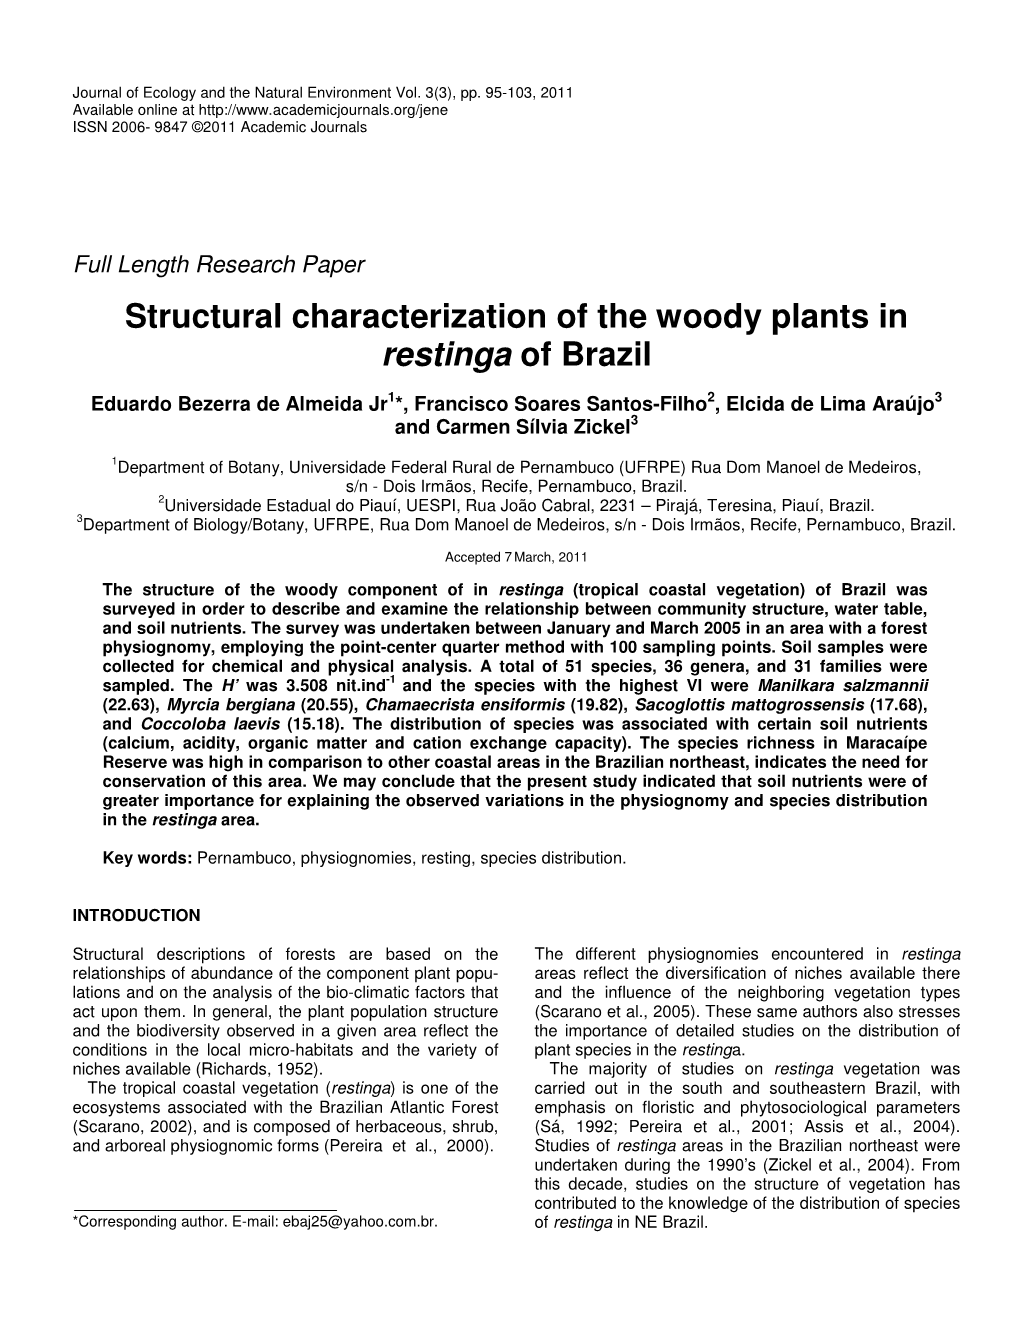 Structural Characterization of the Woody Plants in Restinga of Brazil